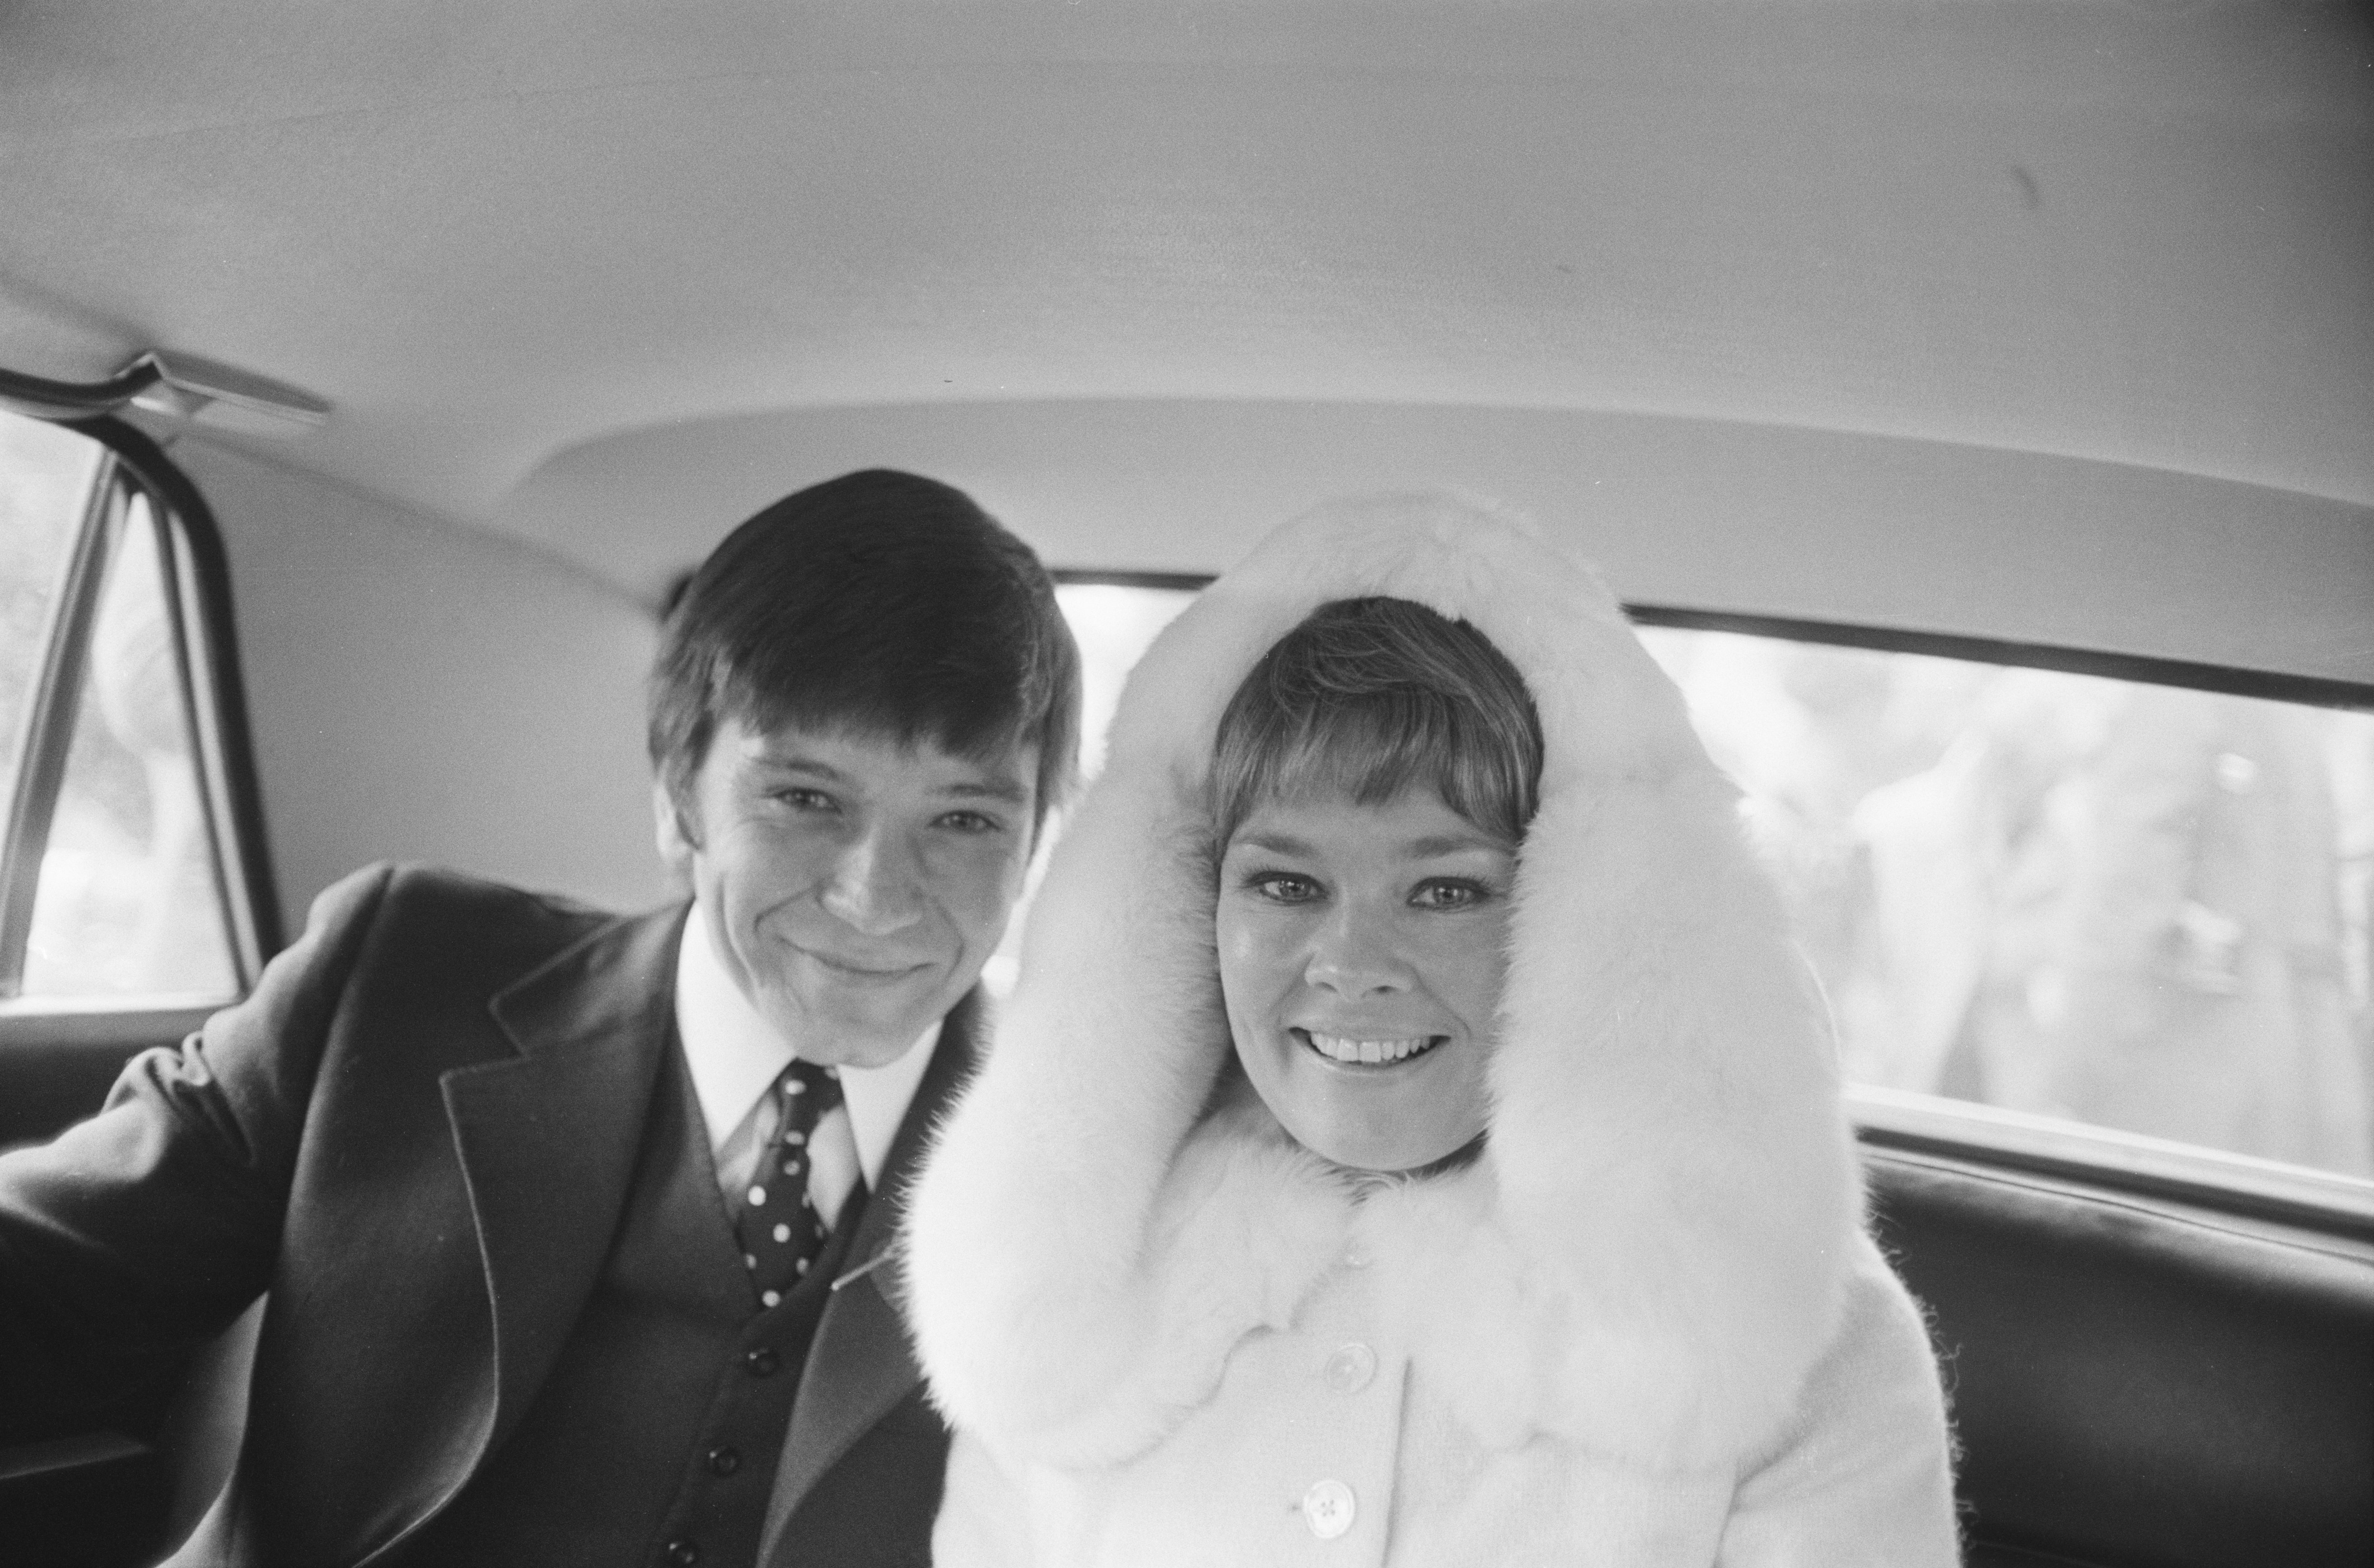 Judi Dench and Michael Williams at St Mary's Church, Hampstead, London, February 5, 1971. | Source: Getty Images